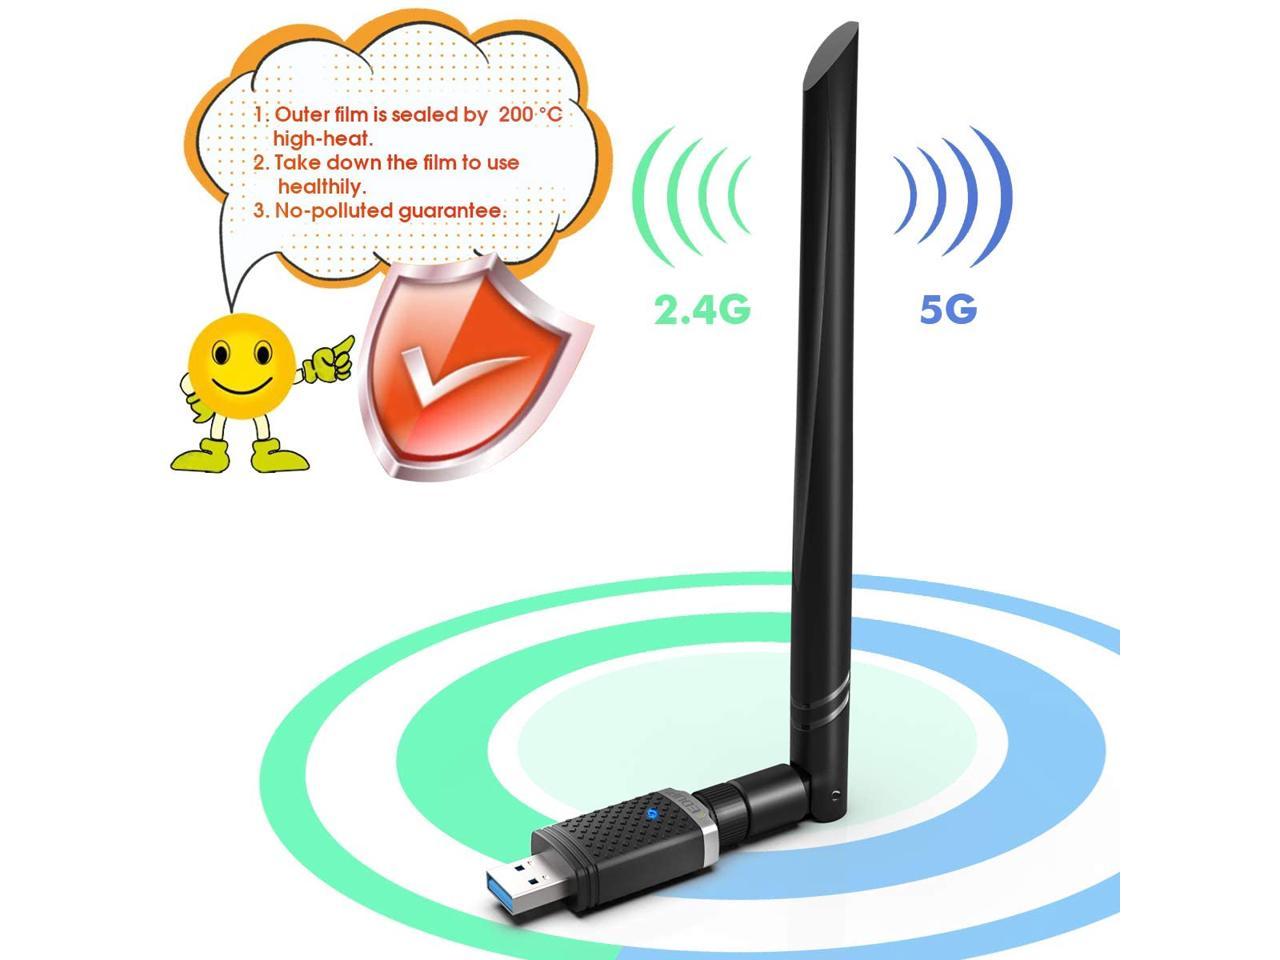 EDUP WiFi Adapter for Gaming 1300Mbps, USB 3.0 Wireless Adapter Dual Band 5GHz 802.11 AC WiFi Dongle 5dBi Antenna Support Desktop Laptop XP/Vista/7/8/10 Mac, USB Flash Driver Included - Newegg.com